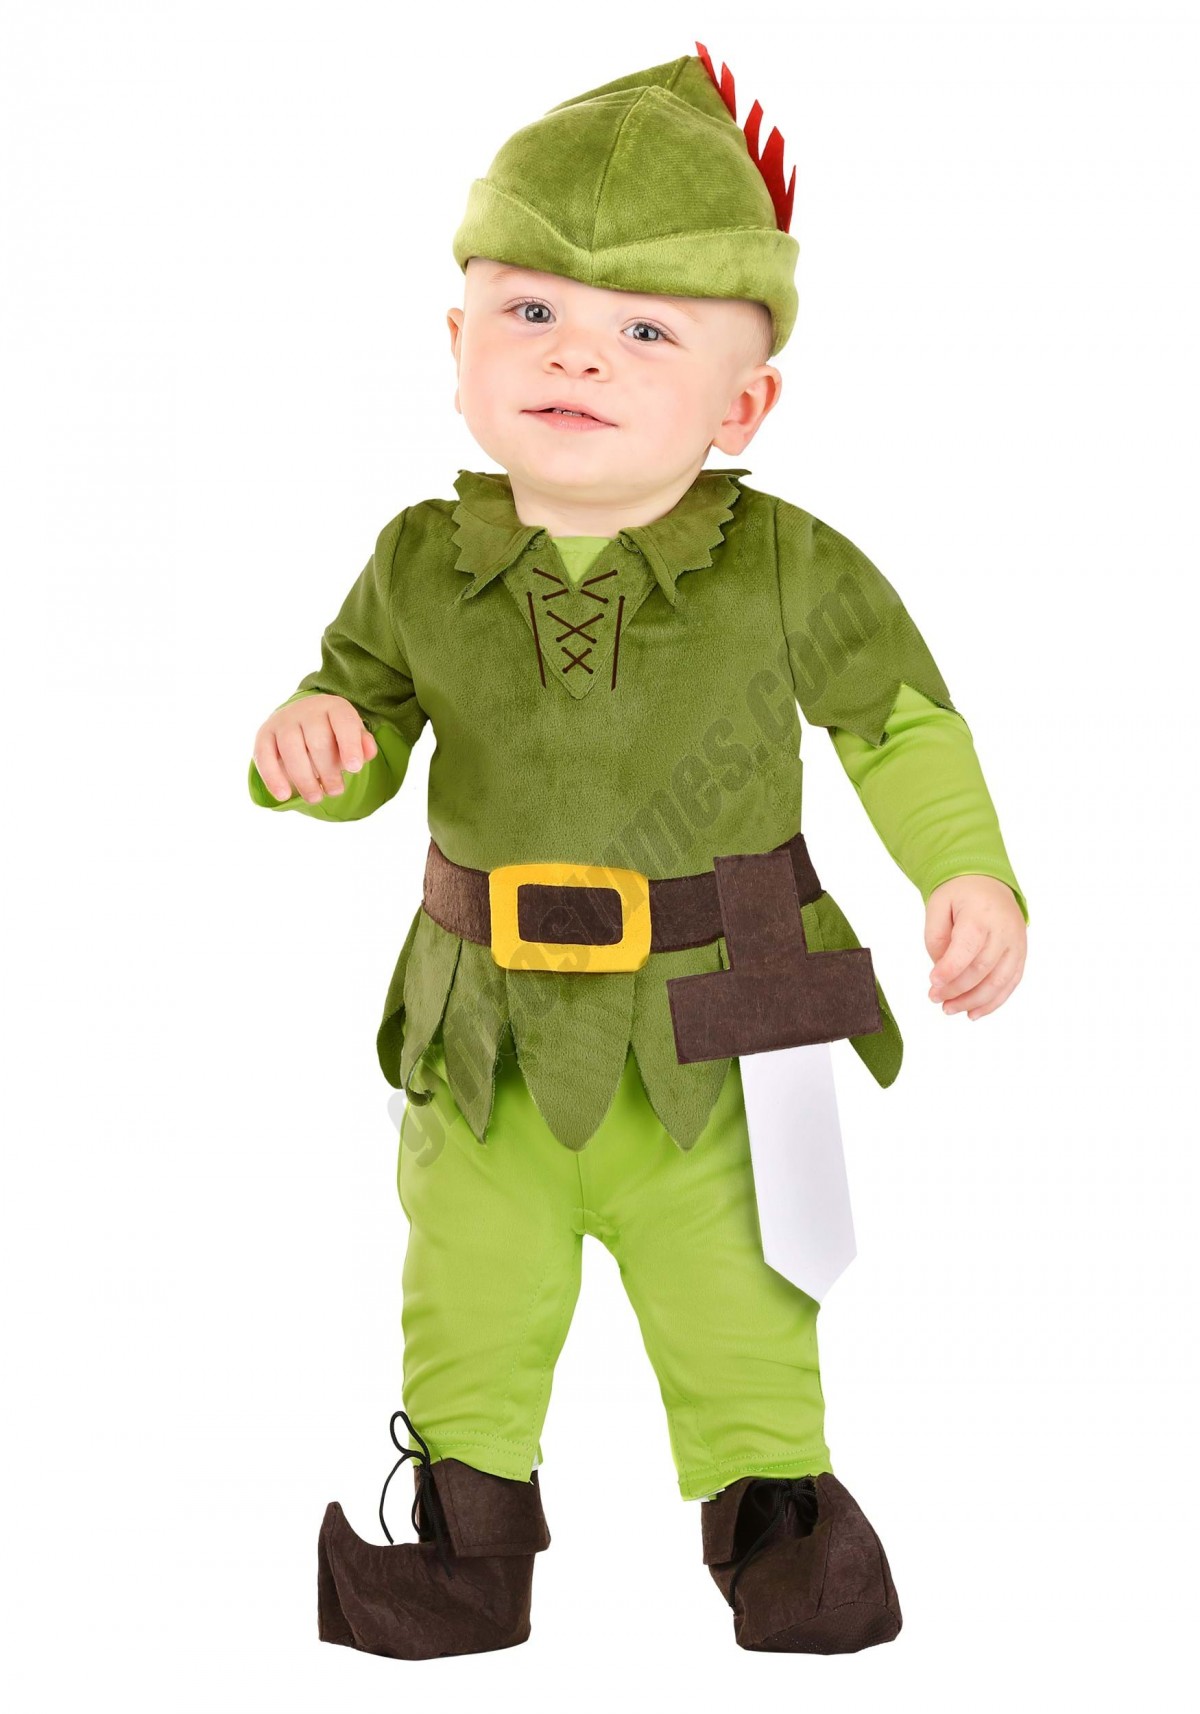 Peter Pan Costume for Infants Promotions - -2